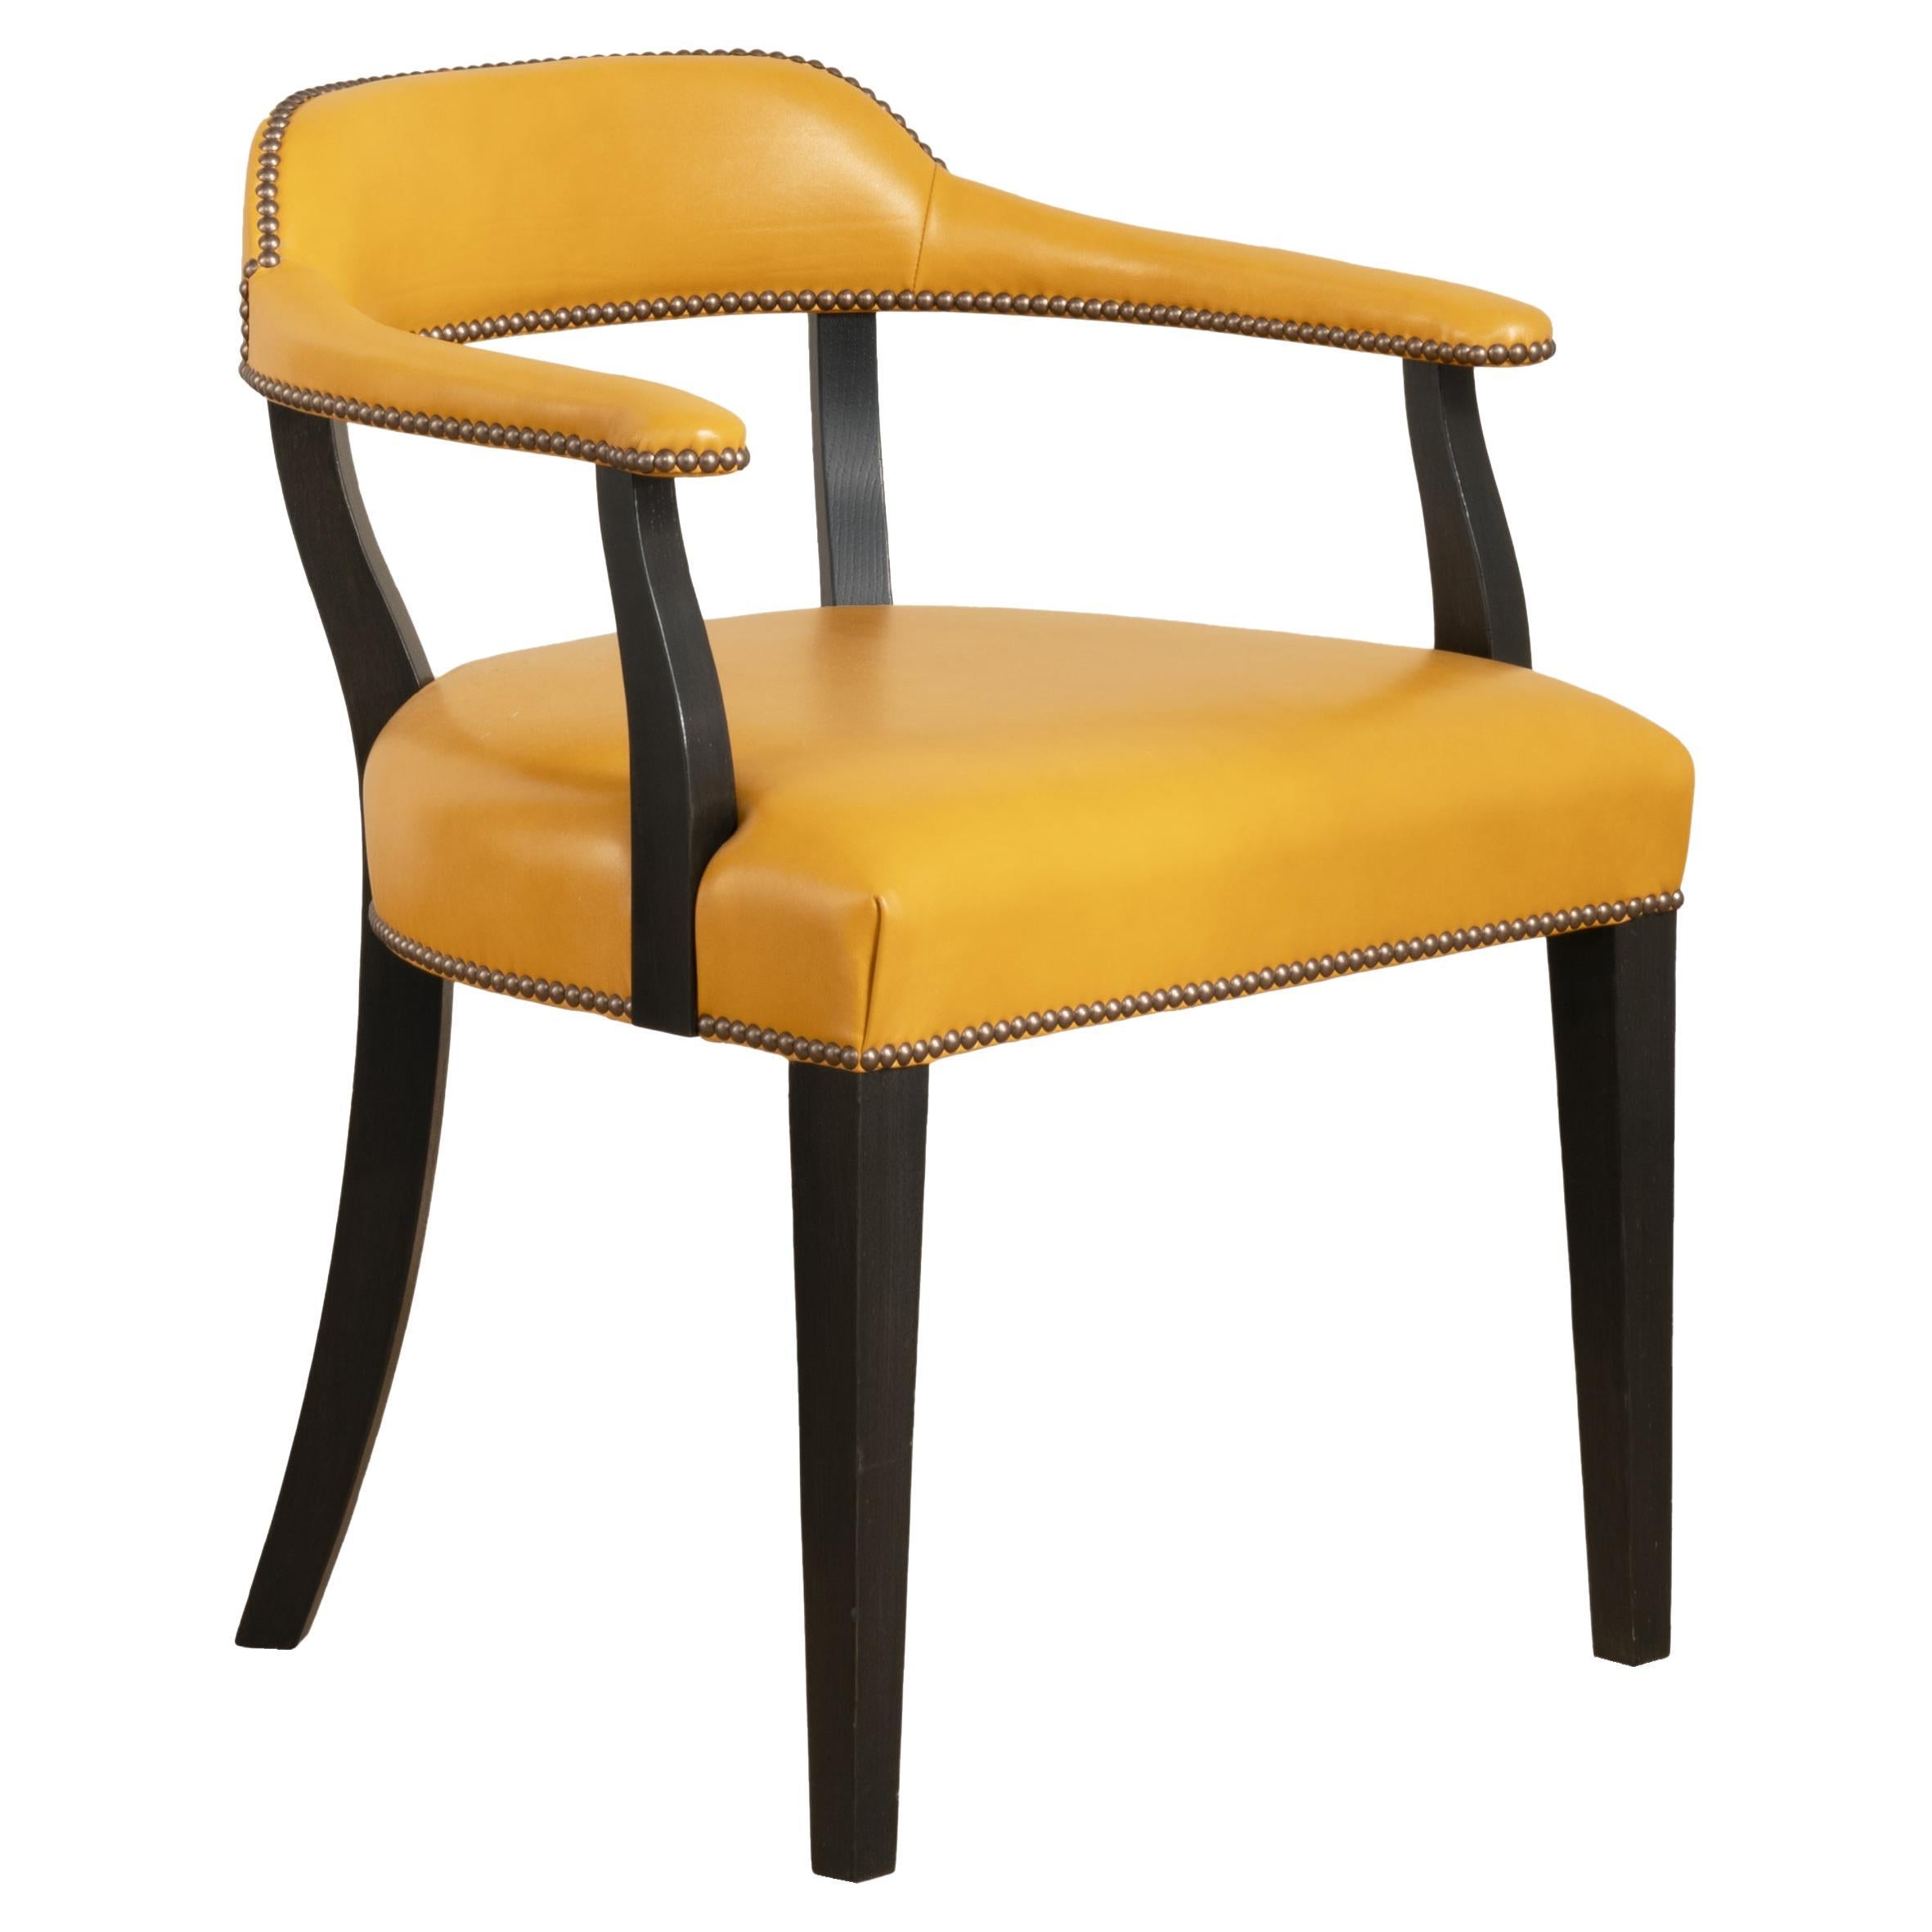 Rupert Bevan Croft Dining Chair (in Customer's Own choice of Material/Leather) For Sale